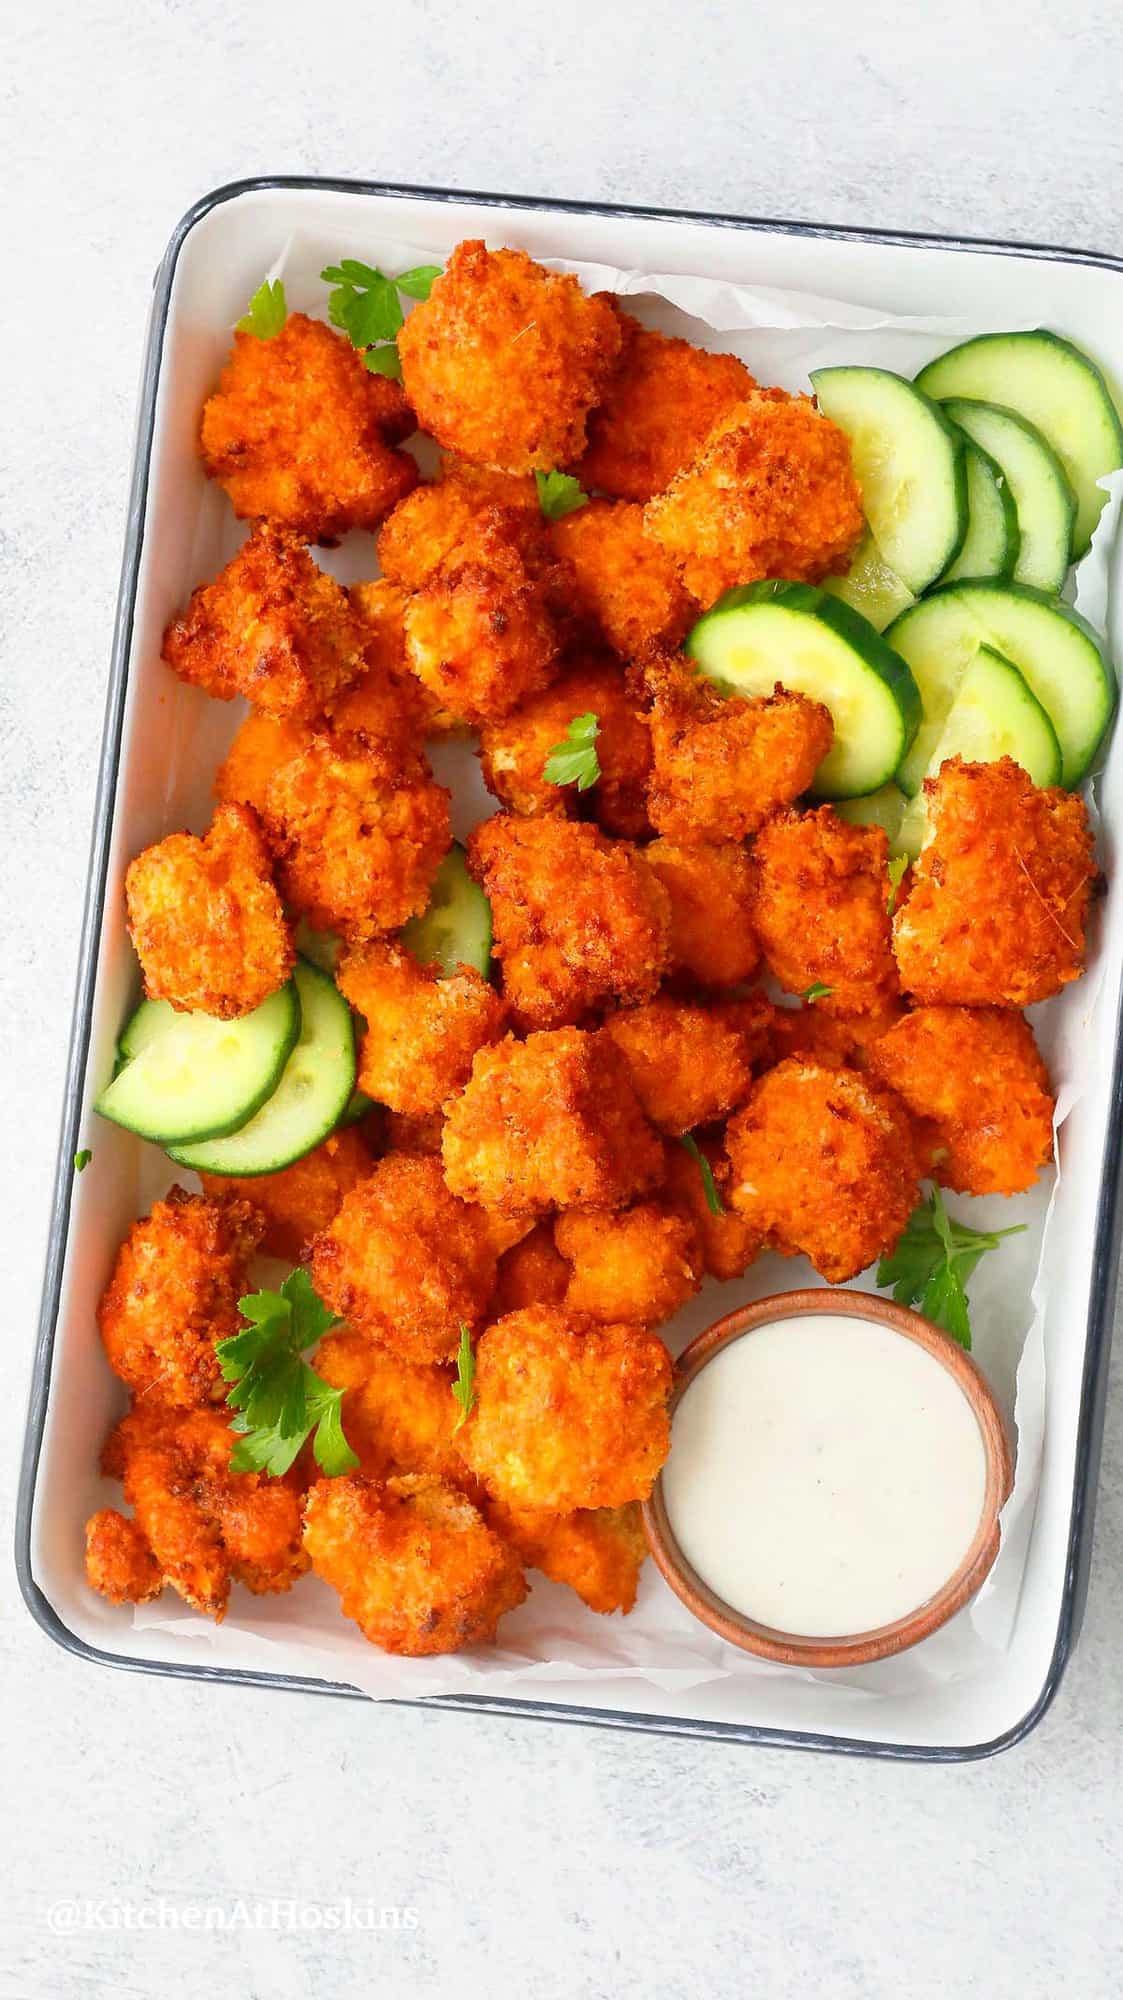 spicy air fried cauliflower wings, cucumber slices with dipping sauce.